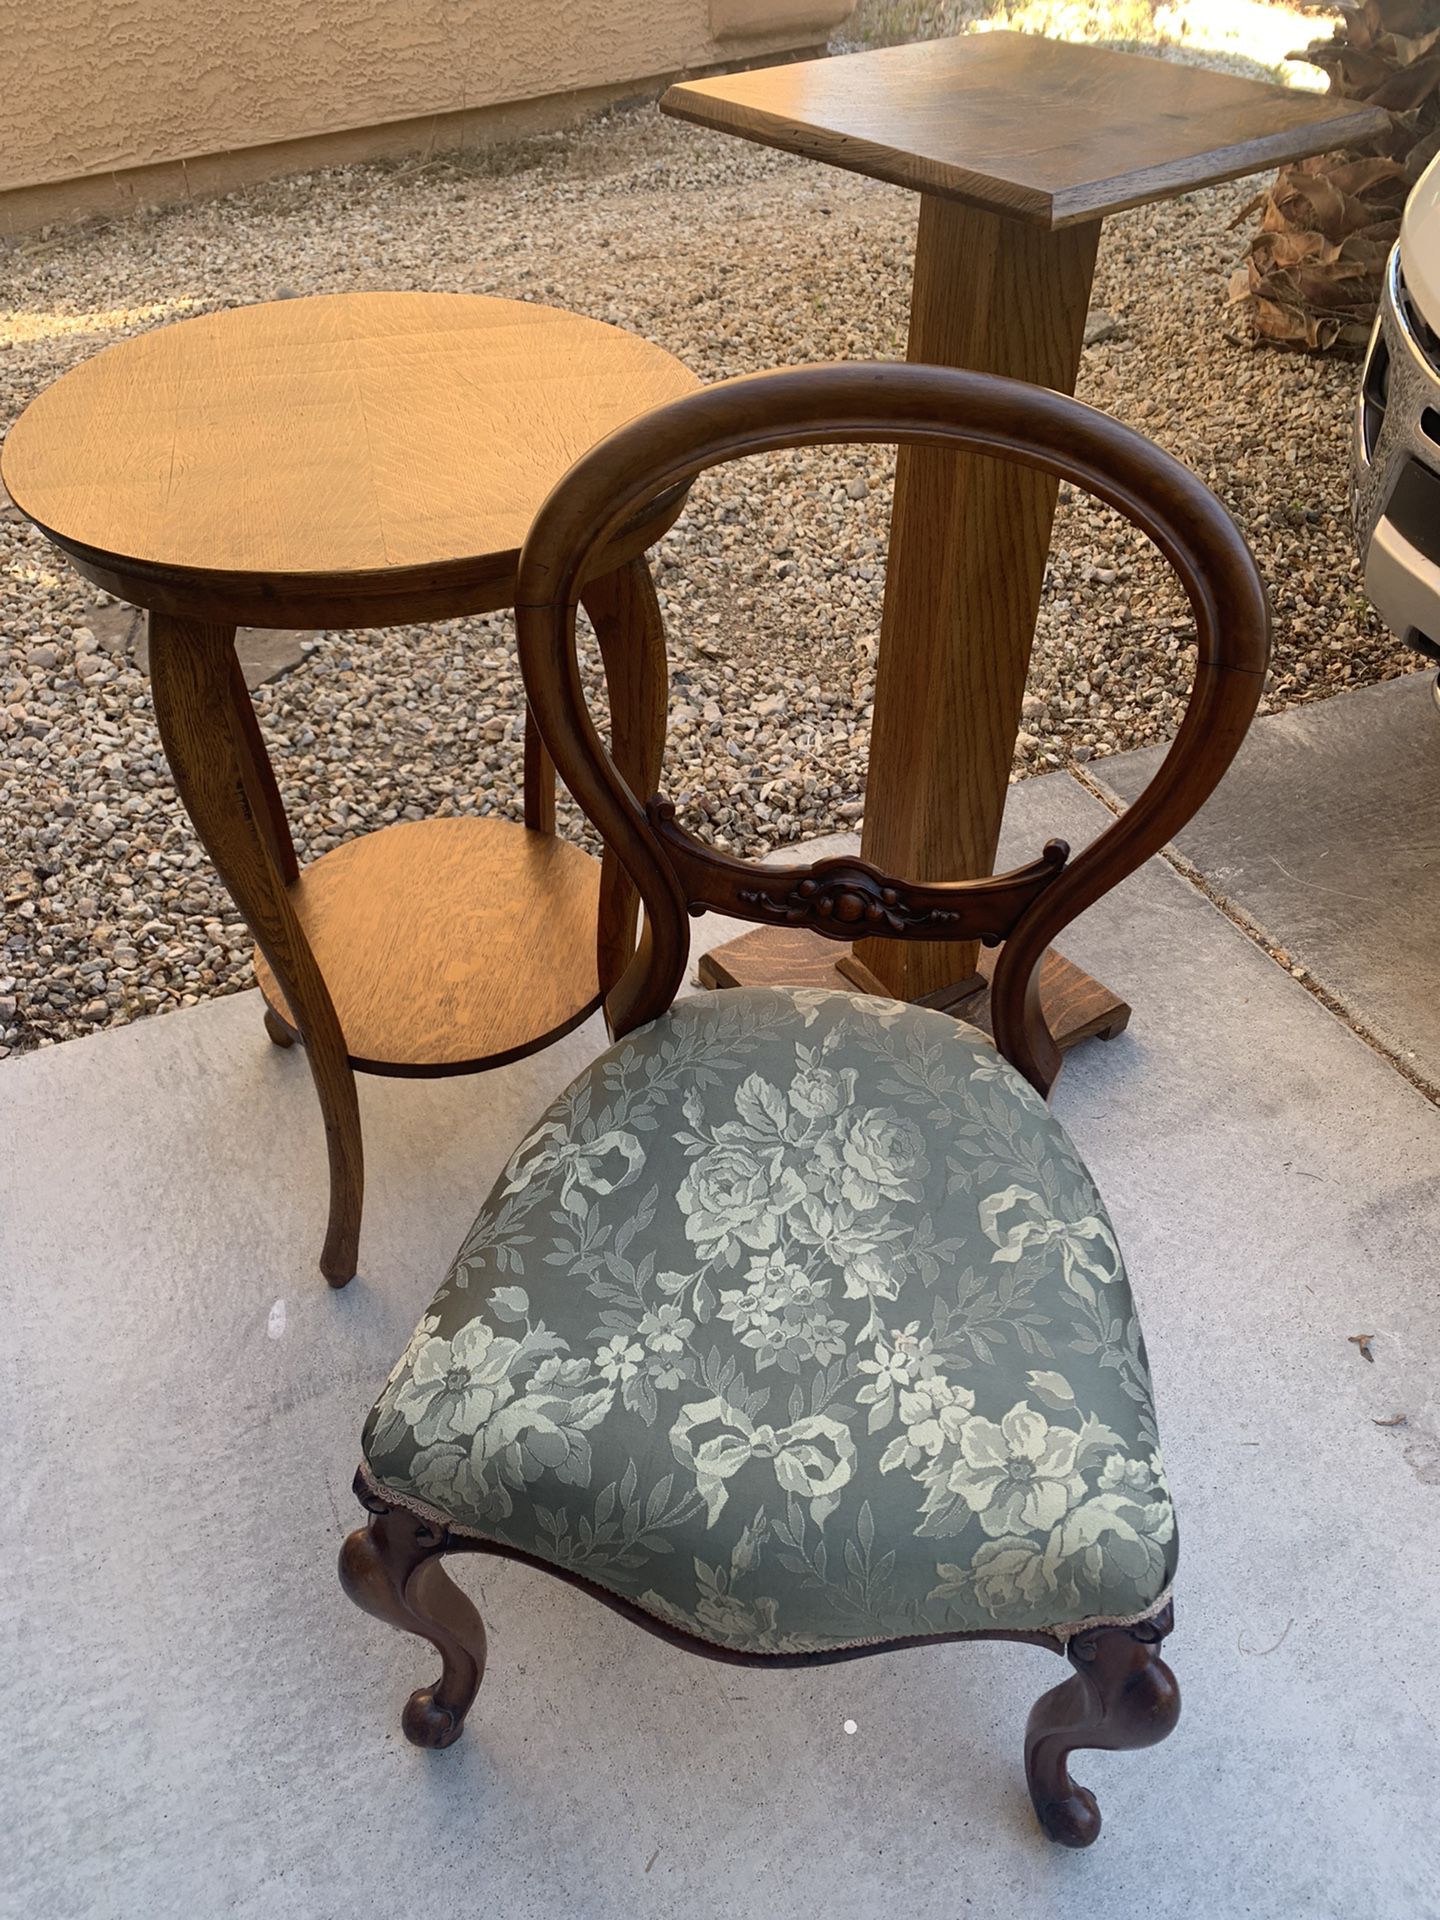 Antique Chair, Pedestal And Table